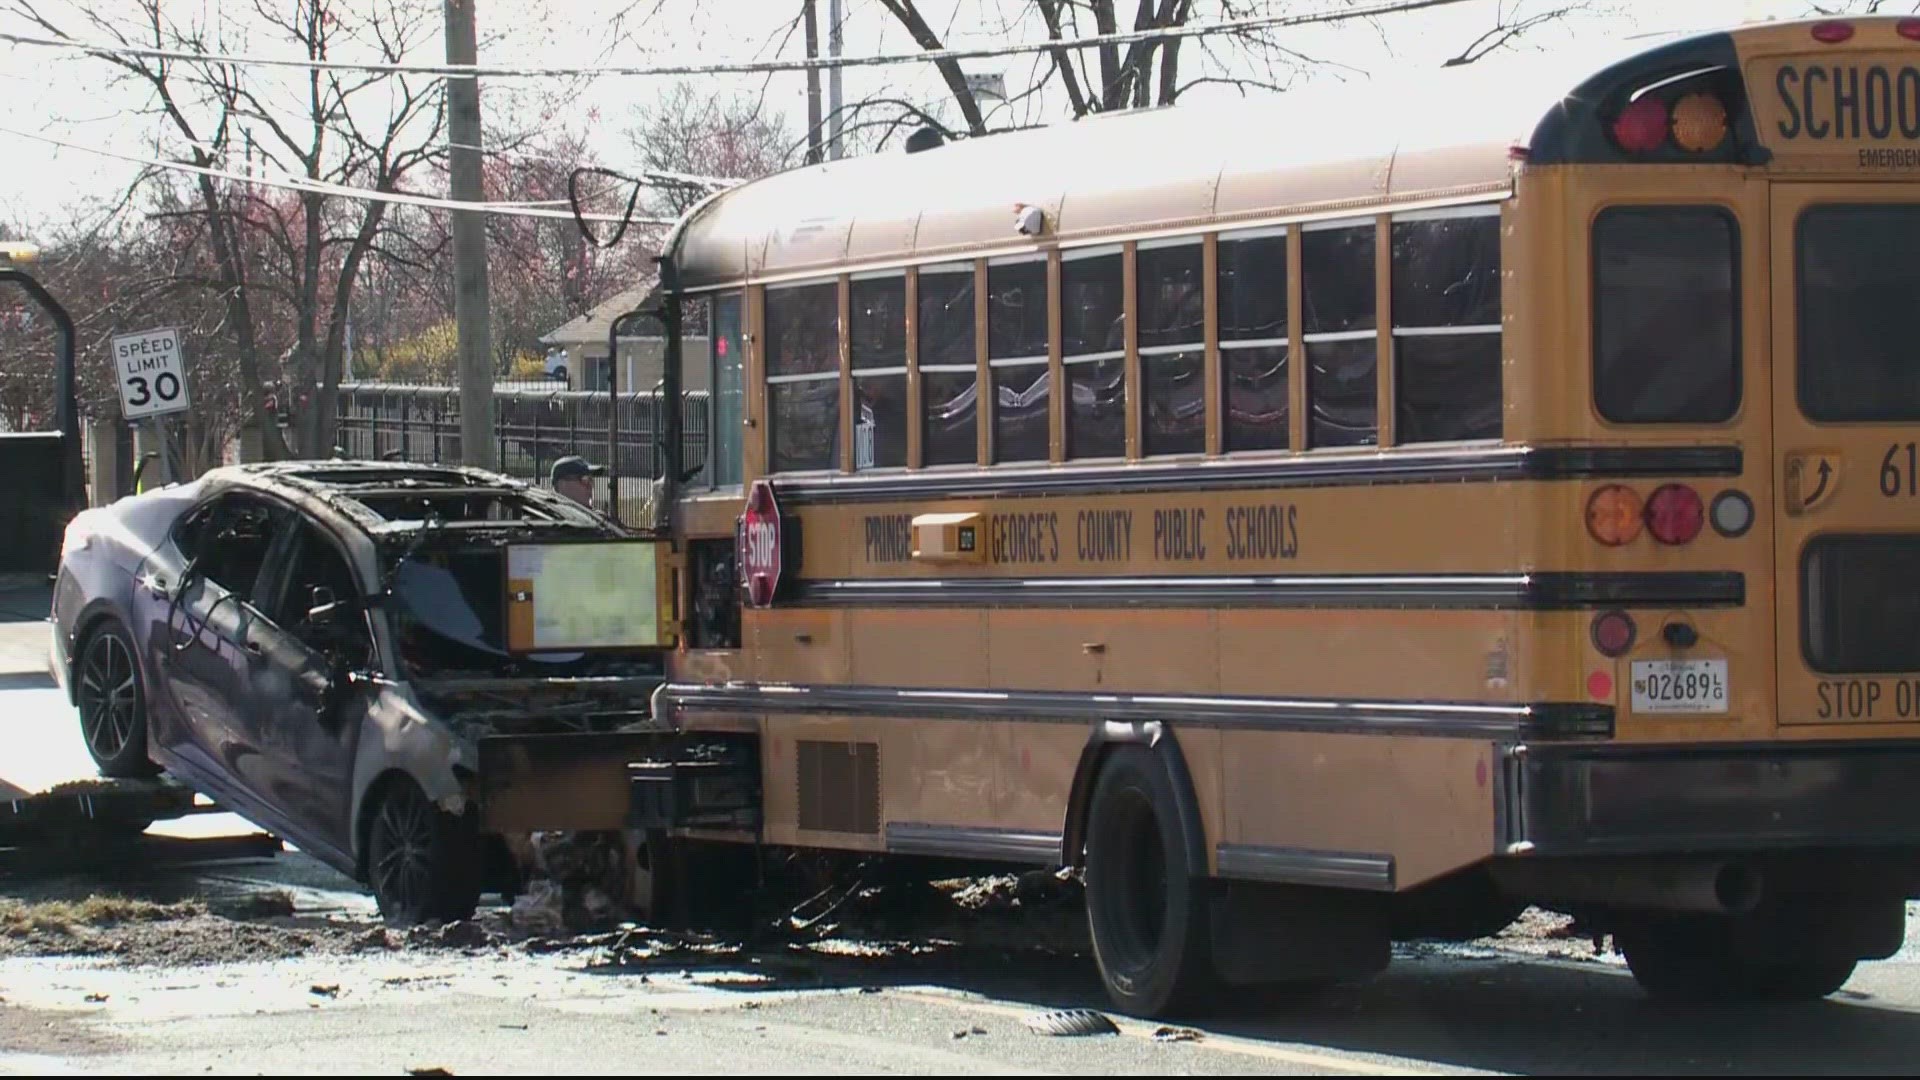 A head-on crash involving a car and a school bus on Suitland Road the bus driver and an aid to the hospital Thursday morning.